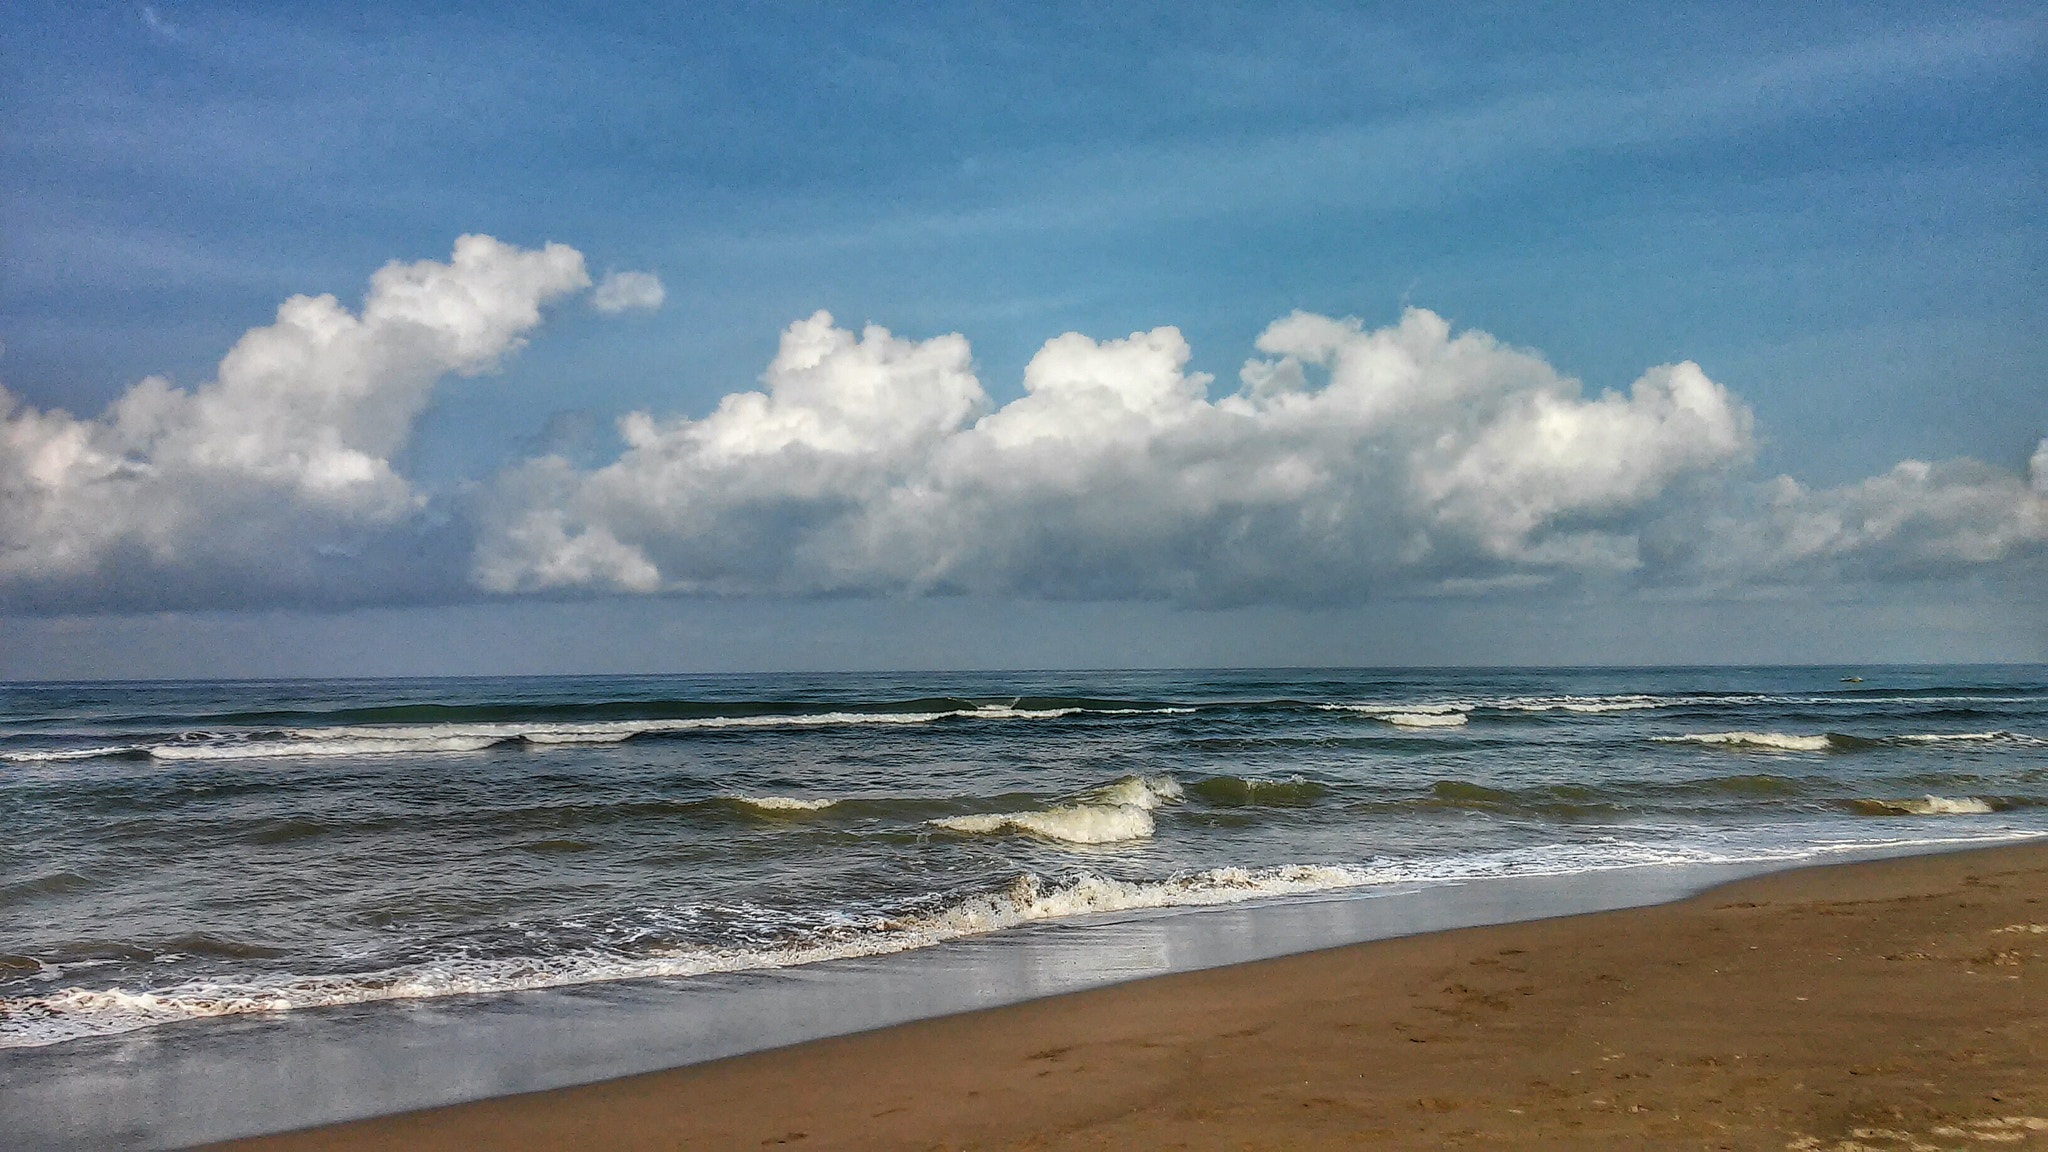 LG G2 MINI sample photo. A day at the beach photography